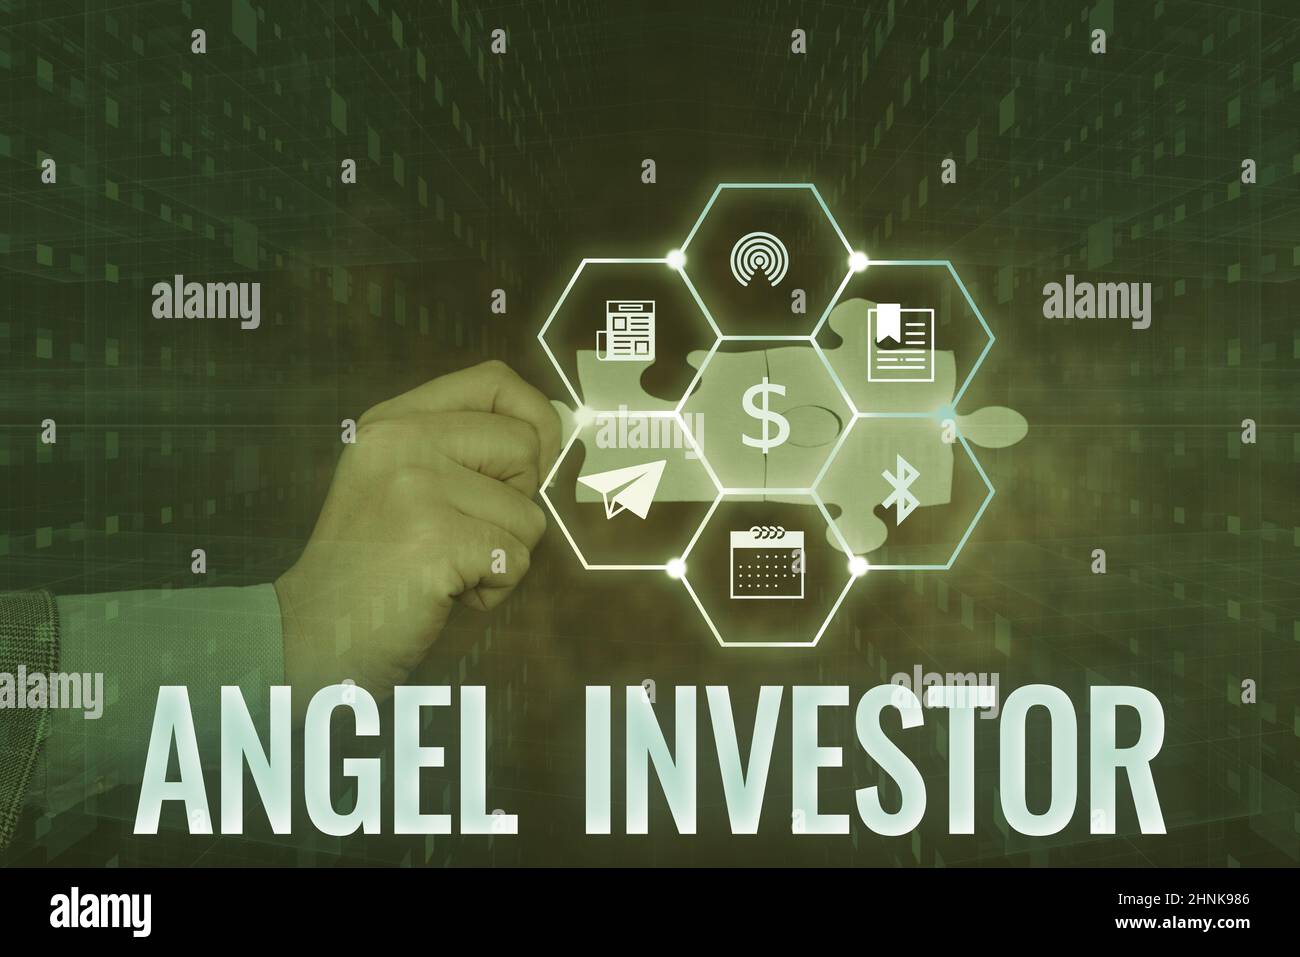 Text caption presenting Angel Investor, Internet Concept high net worth individual who provides financial backing Hand Holding Jigsaw Puzzle Piece Unl Stock Photo